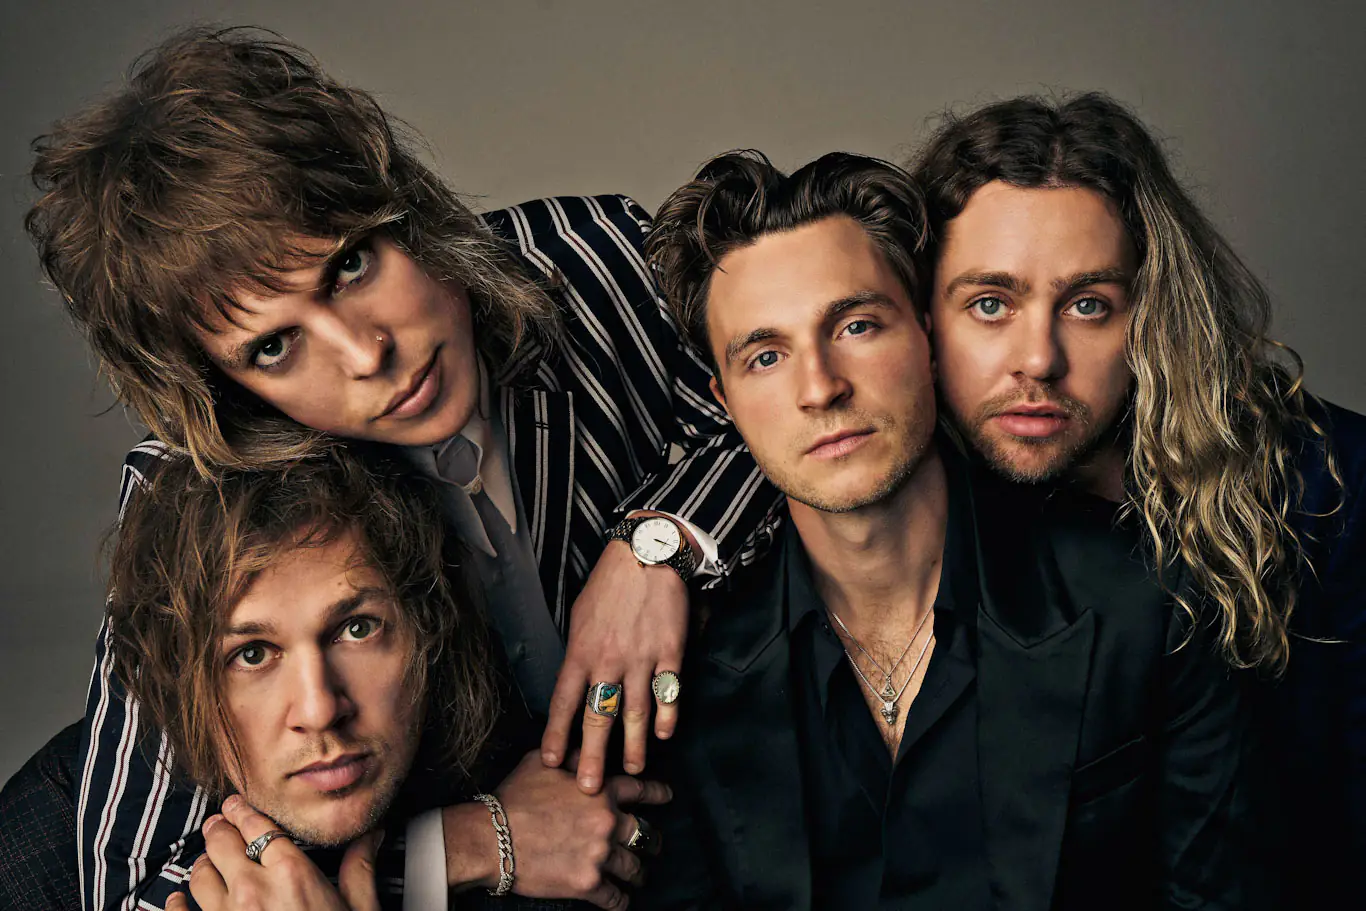 THE STRUTS announce new album ‘Pretty Vicious’ & share video for new single ‘Too Good At Raising Hell’